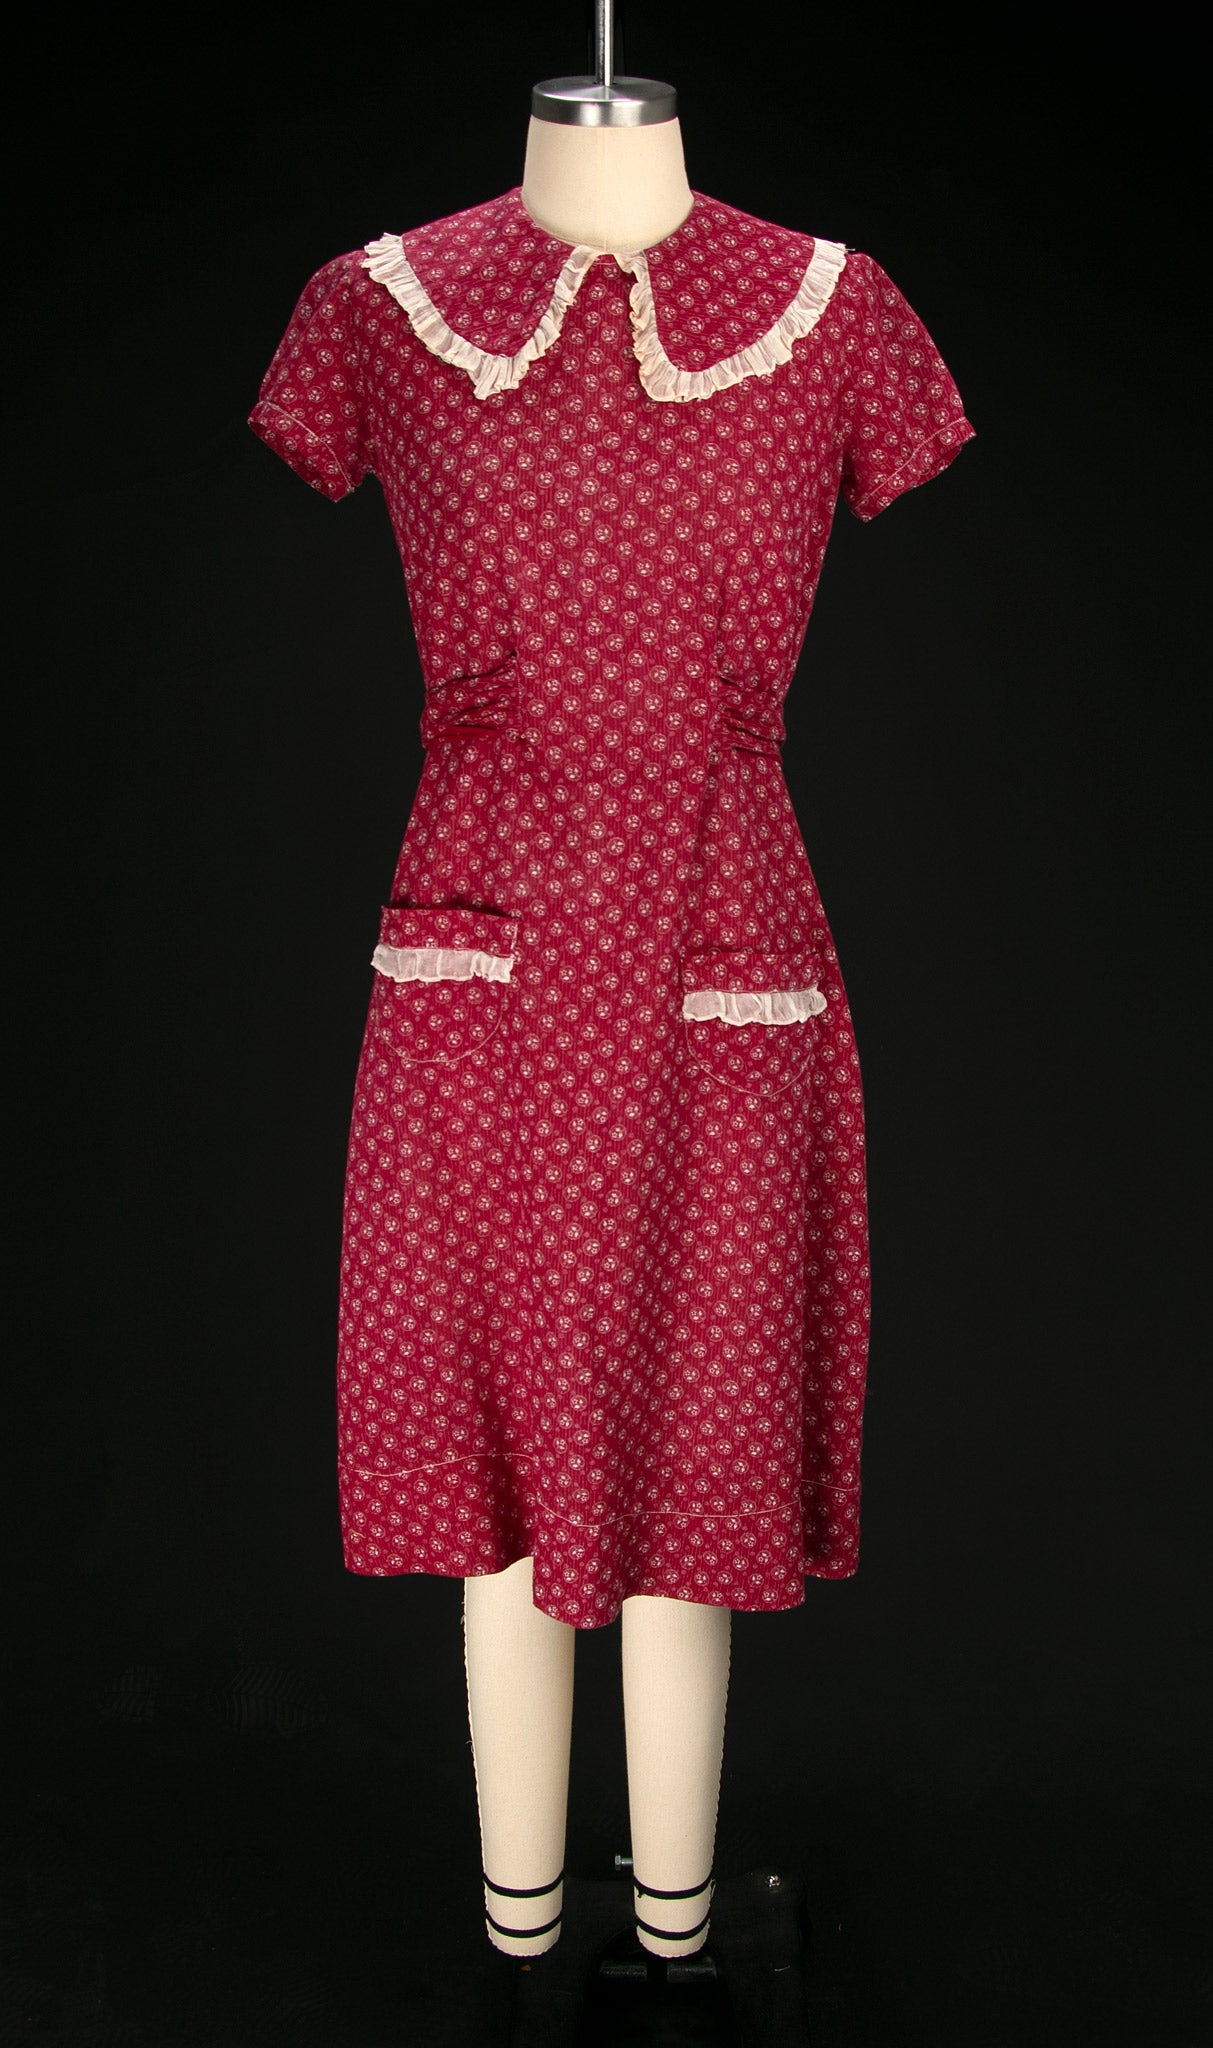 Early Vintage 1920's - 1930's Burgundy Cotton Dress with Ruffled Trim